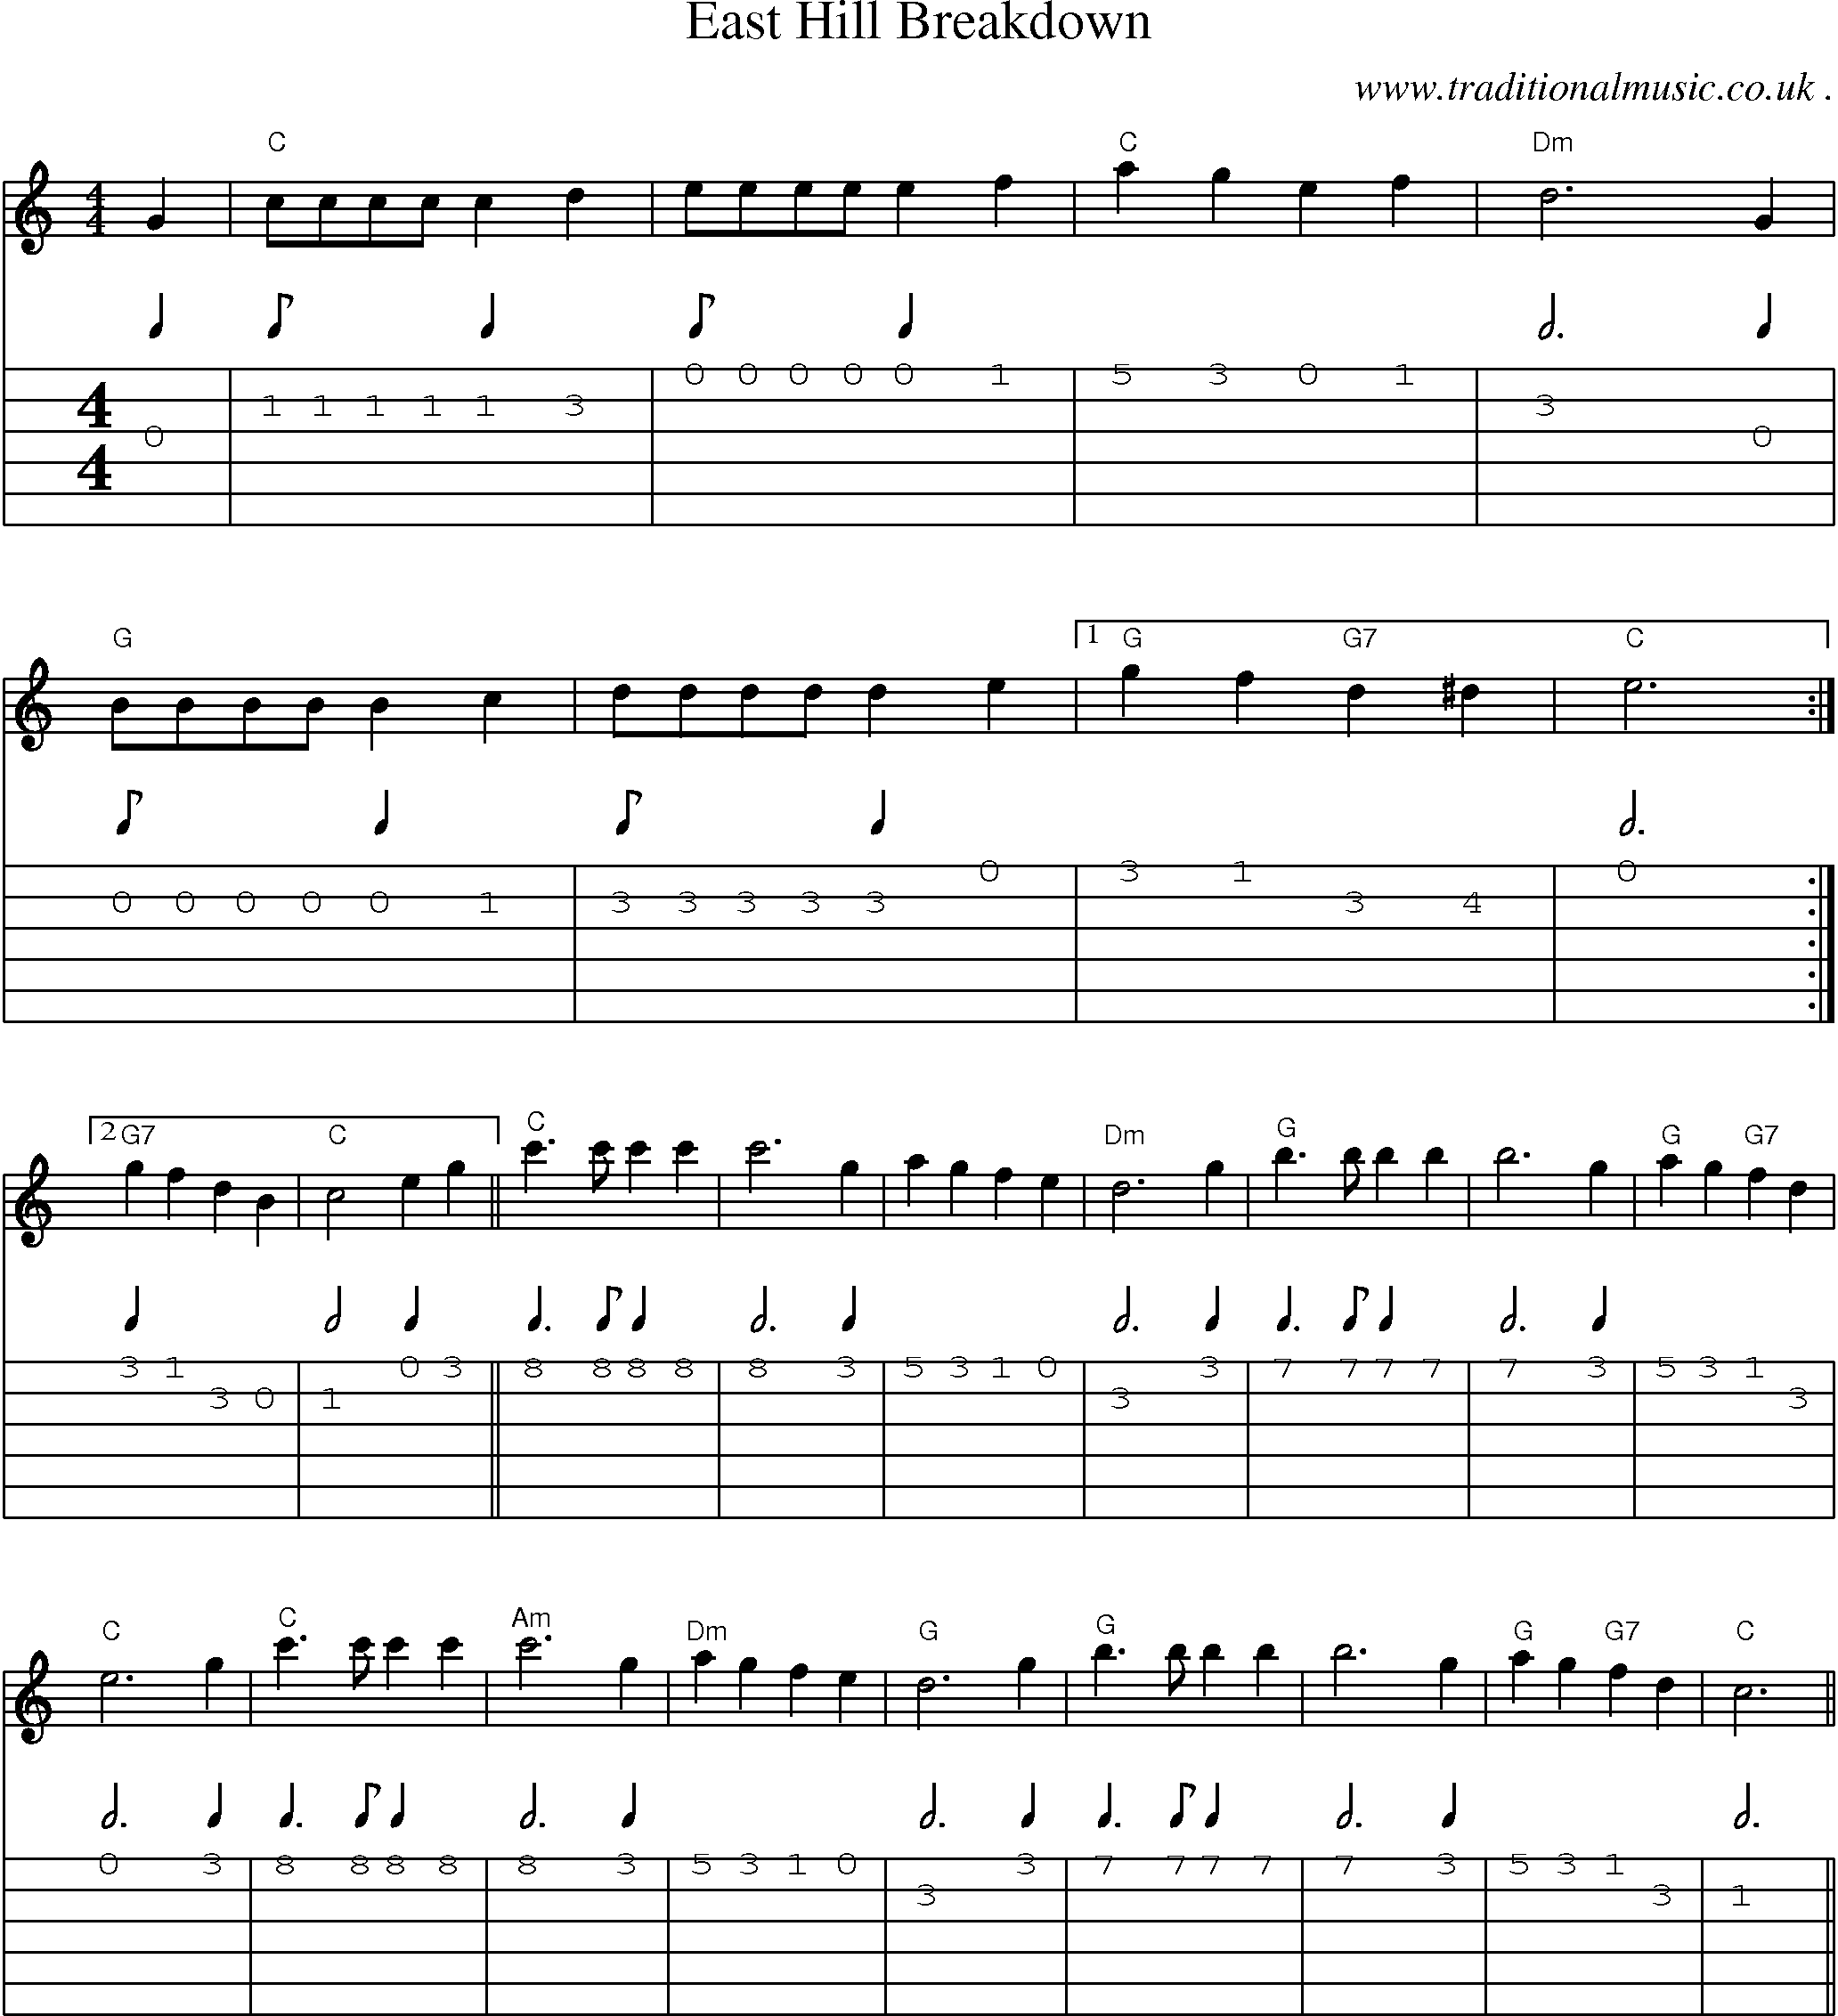 Music Score and Guitar Tabs for East Hill Breakdown